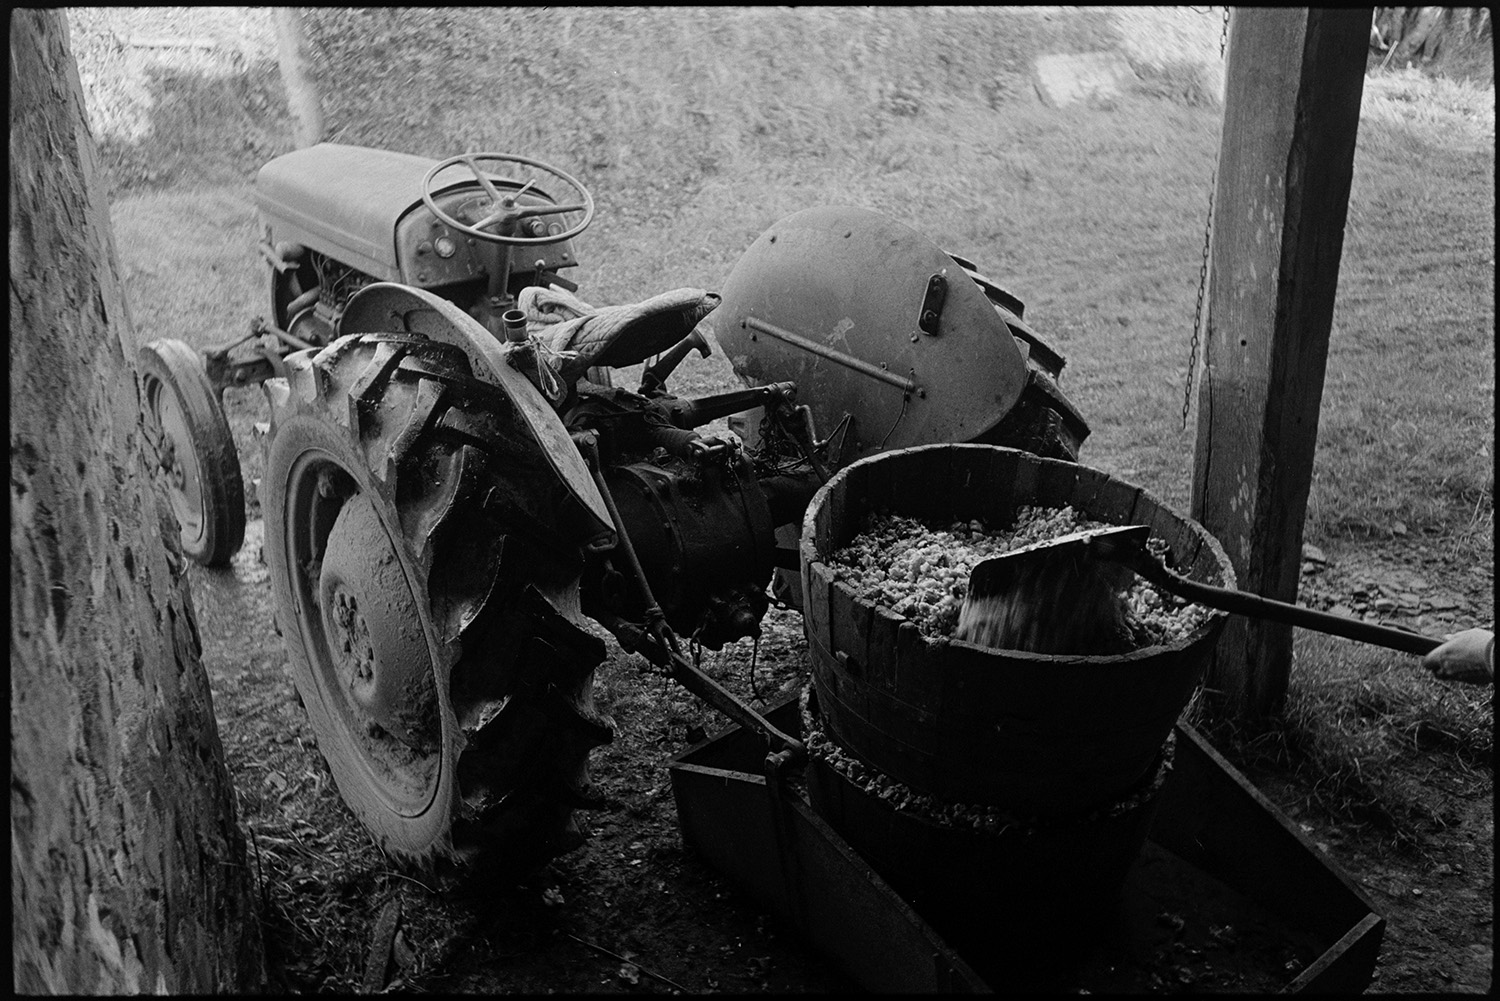 Cider making, apple crusher and cider press. 
[A tractor with barrels full of apple pulp for cider making parked outside a barn at Rashleigh Mill, Bridge Reeve. A shovel is resting on the pulp.]